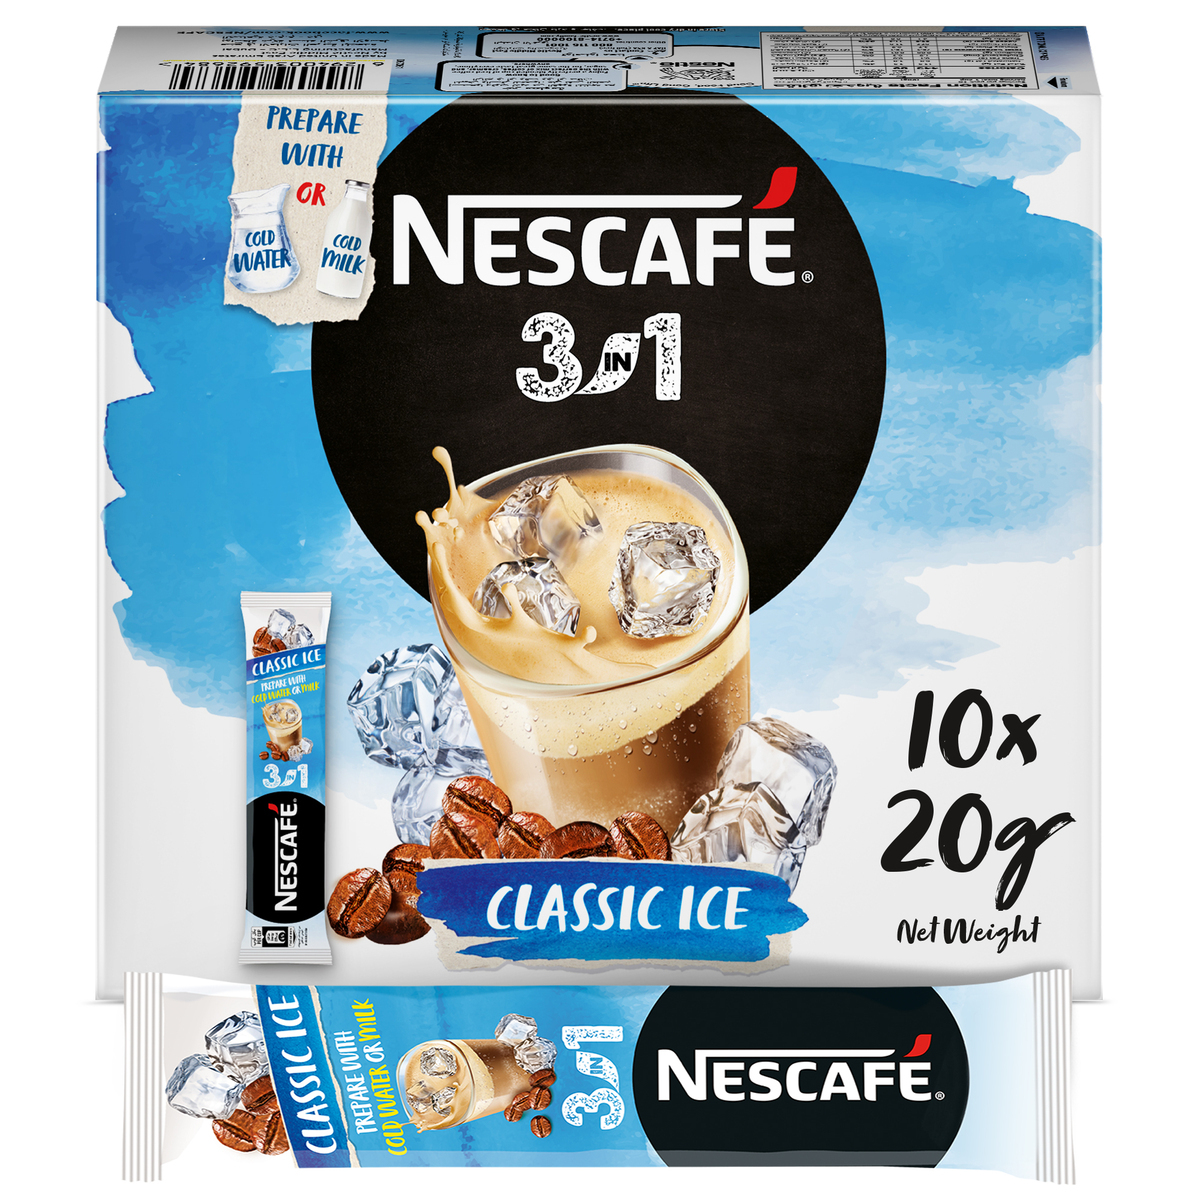 Discover Nescafe Iced Coffee Latte Online